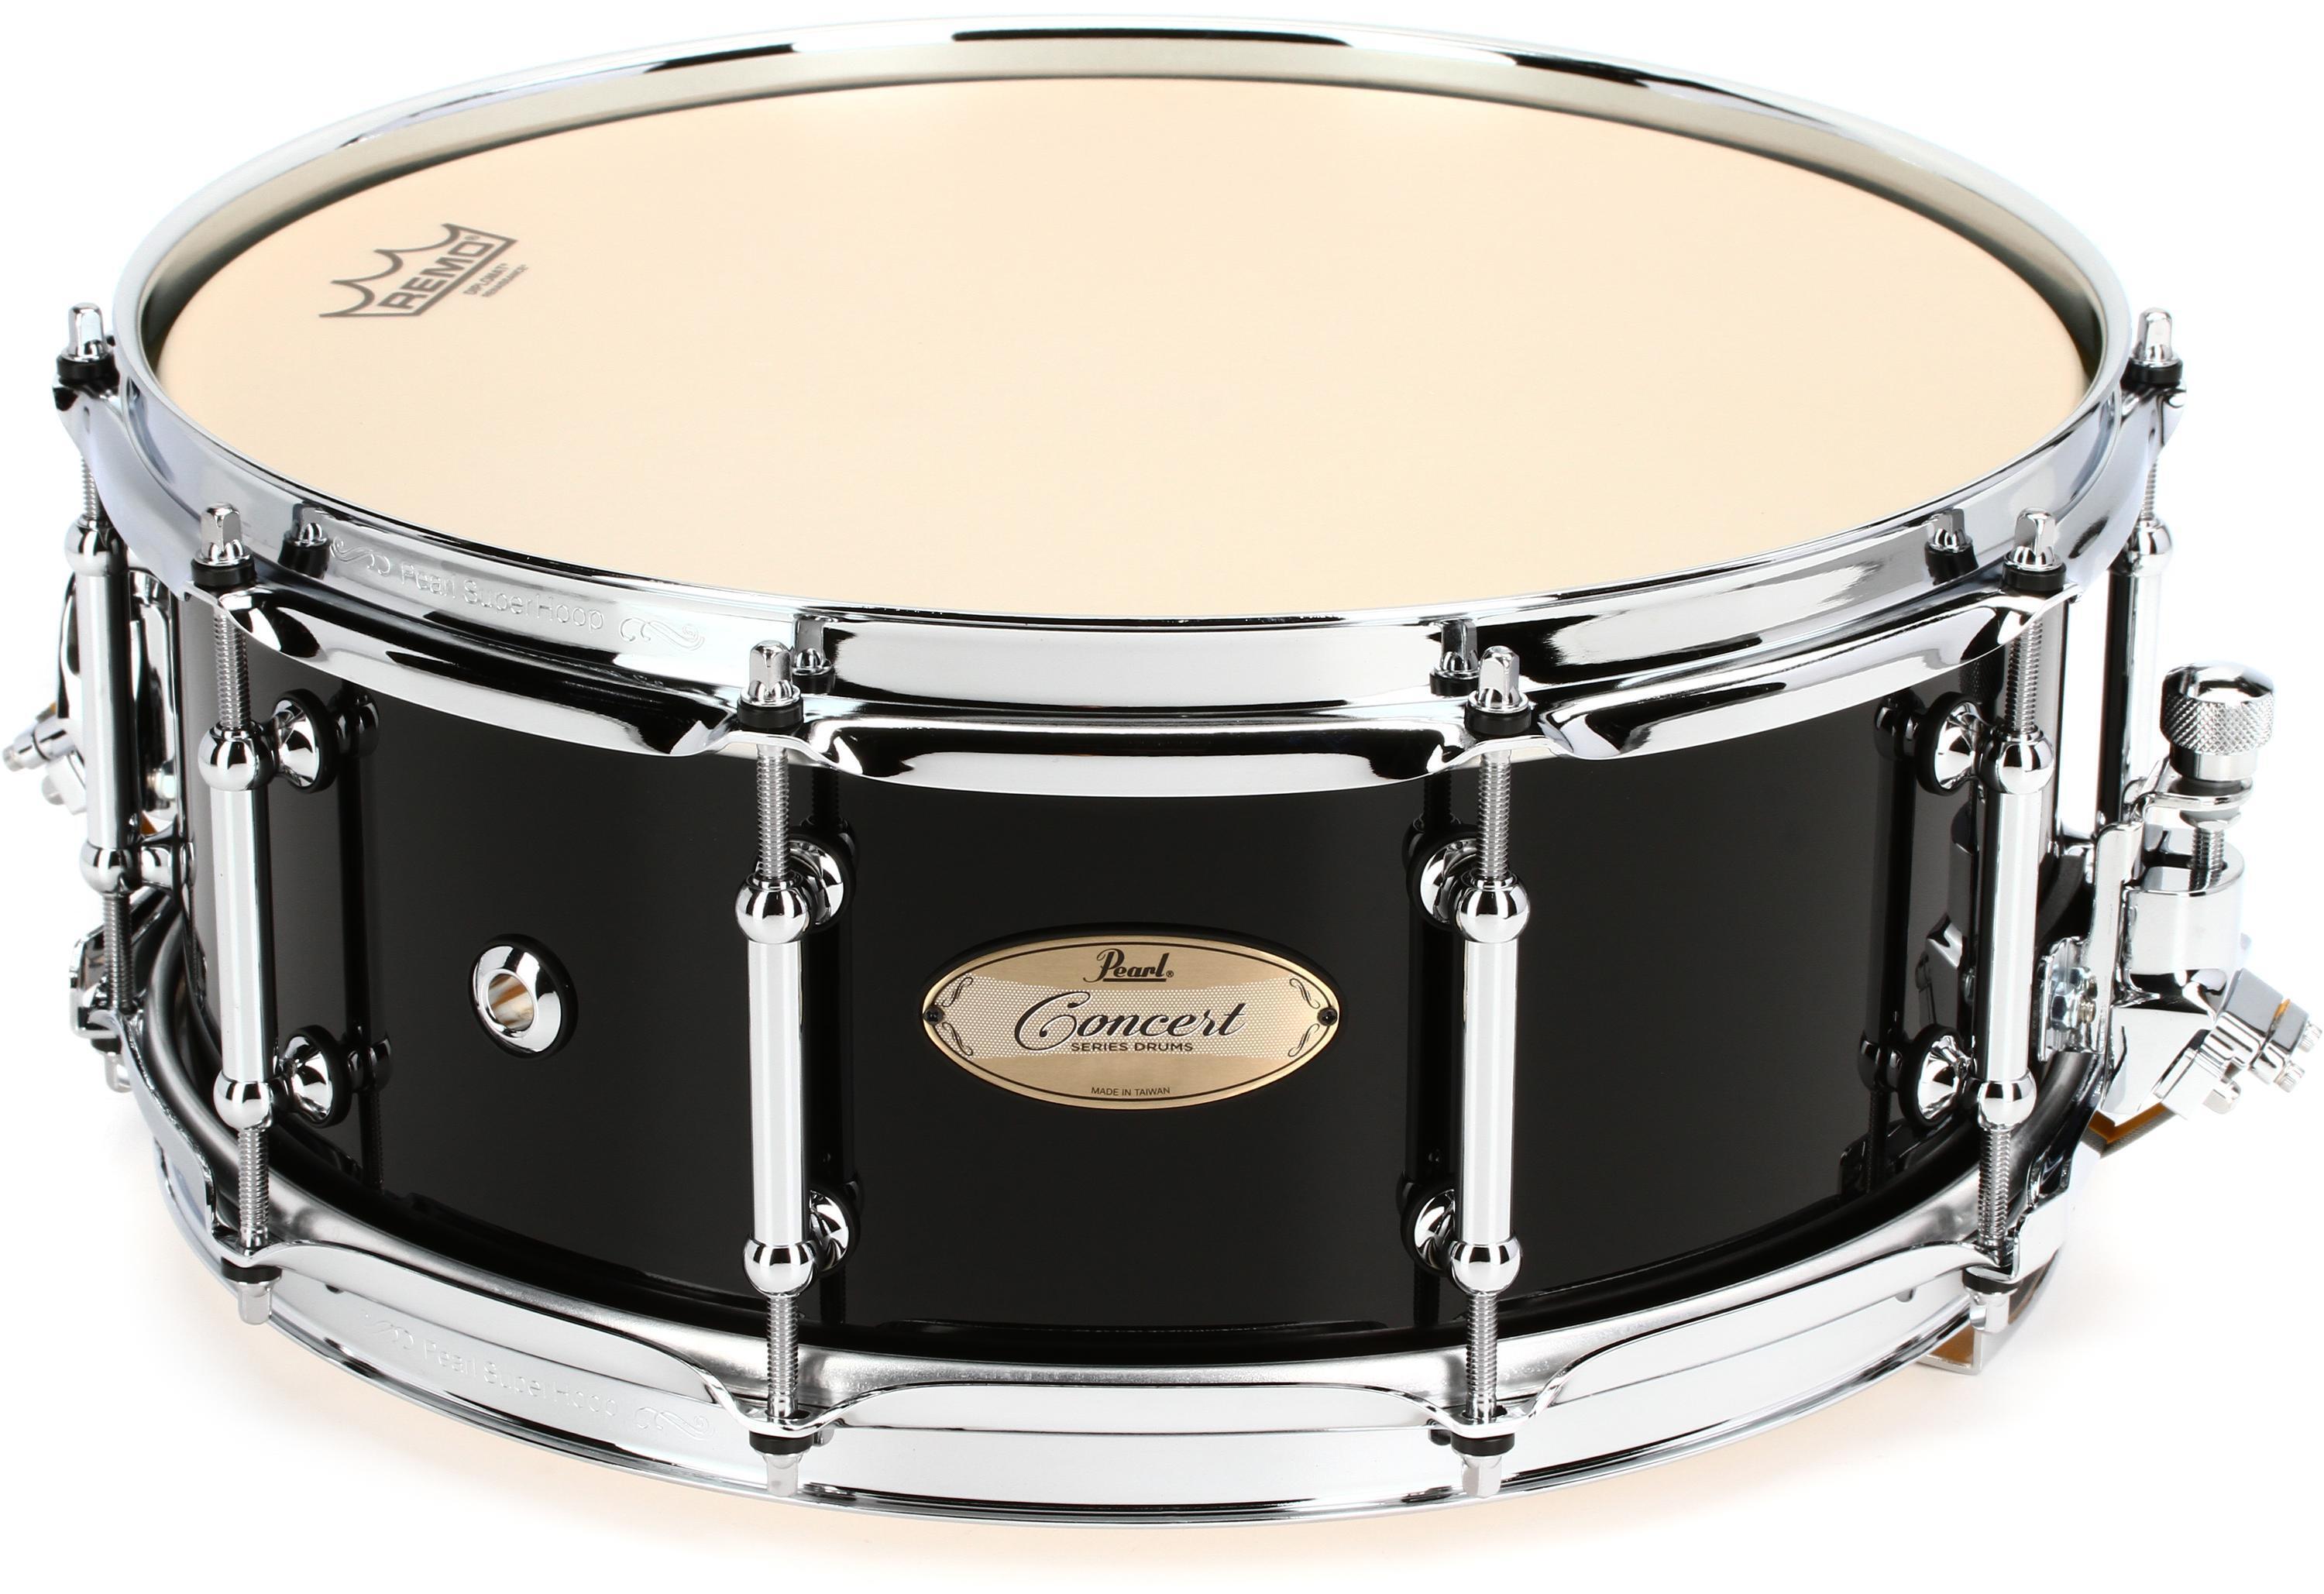  Pearl PHTV1455S/C Philharmonic PURE Concert Snare Drum :  Musical Instruments